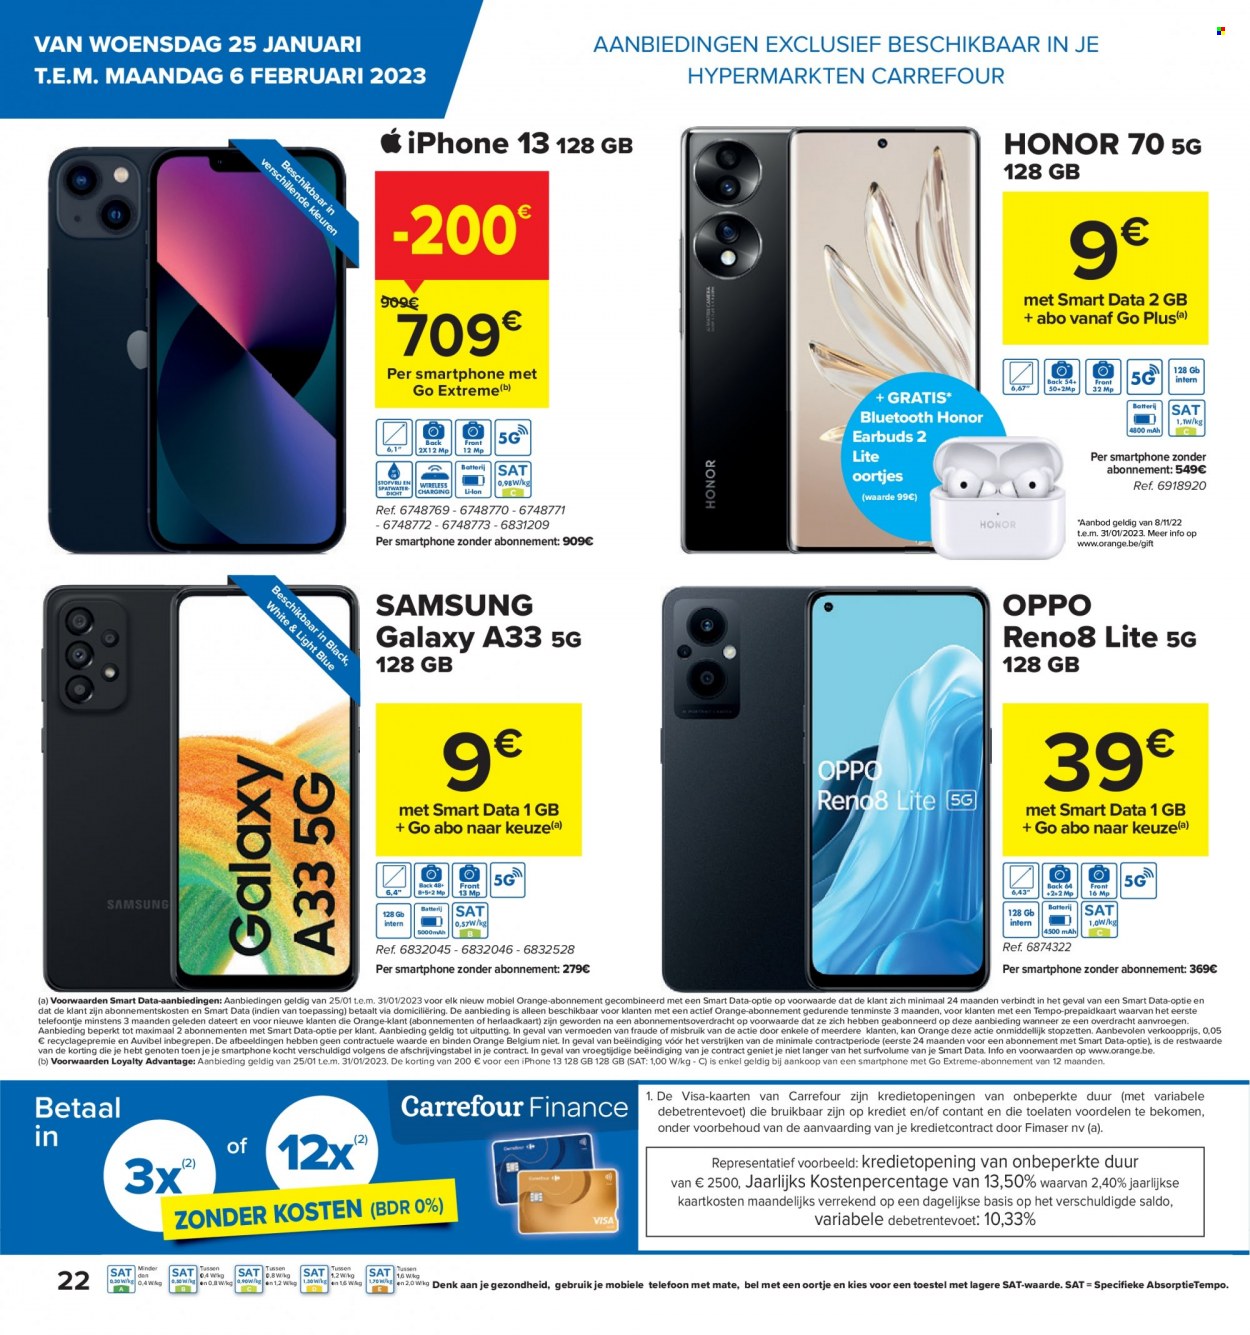 thumbnail - Catalogue Carrefour hypermarkt - 25/01/2023 - 06/02/2023 - Produits soldés - Samsung, smartphone, iPhone, Oppo, Honor. Page 2.